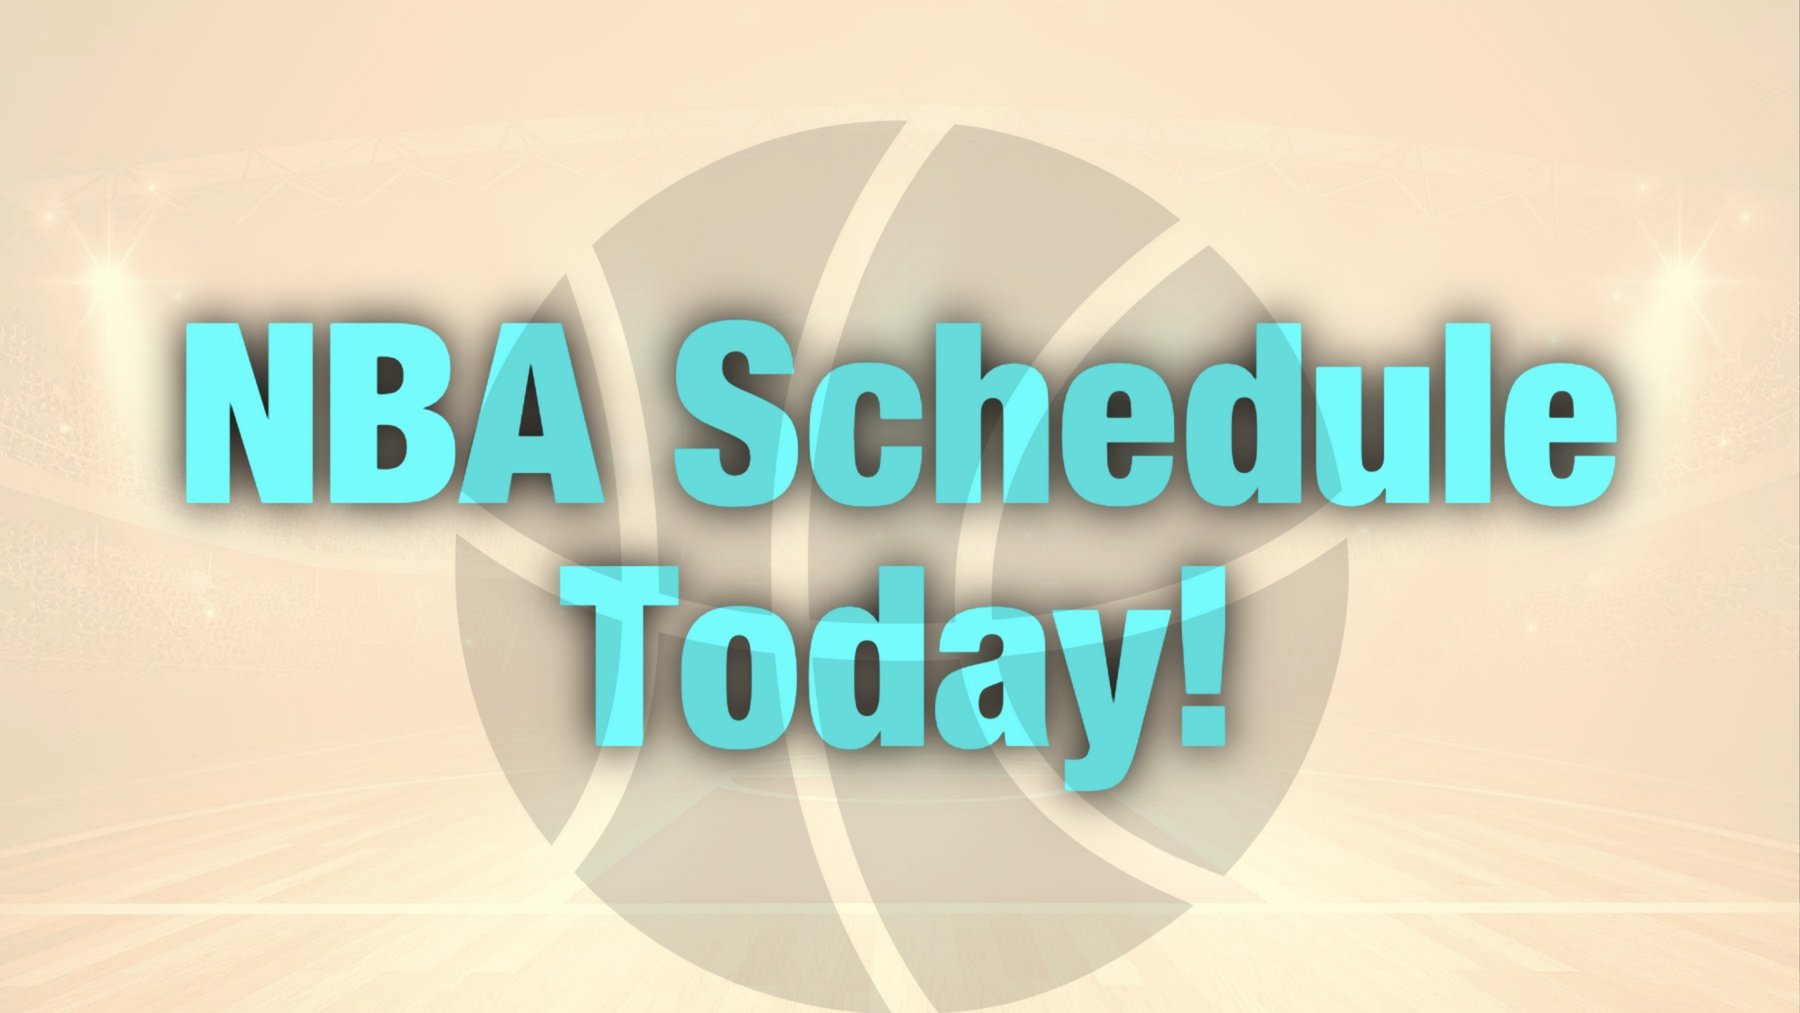 Watch the NBA schedule today and tonight